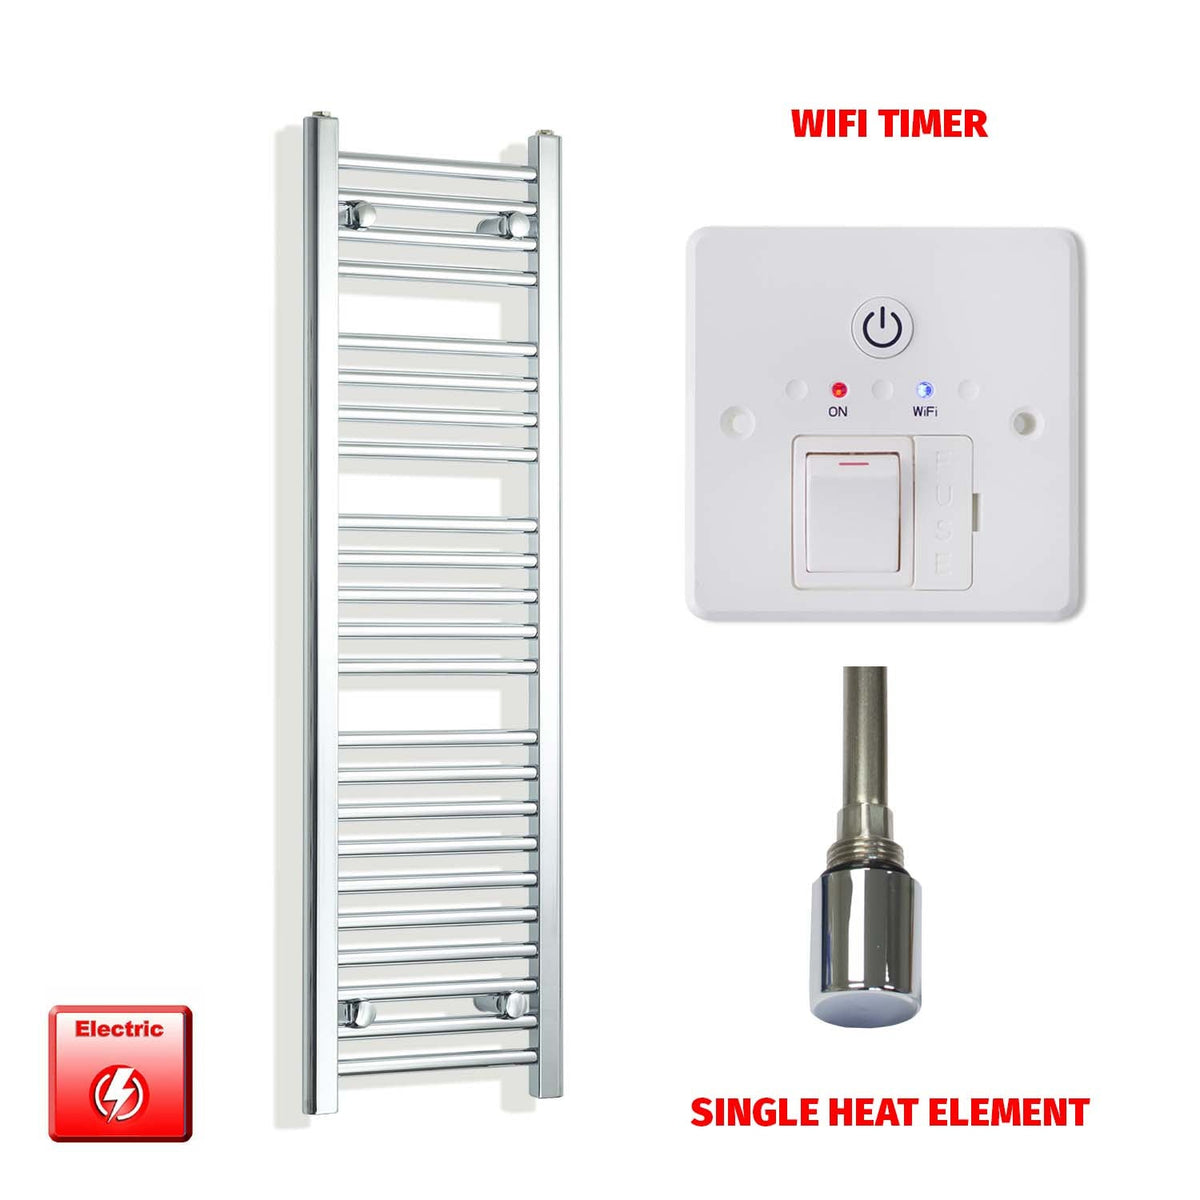 1400mm High 350mm Wide Pre-Filled Electric Heated Towel Rail Radiator Straight Chrome Single heat element nWifi timer